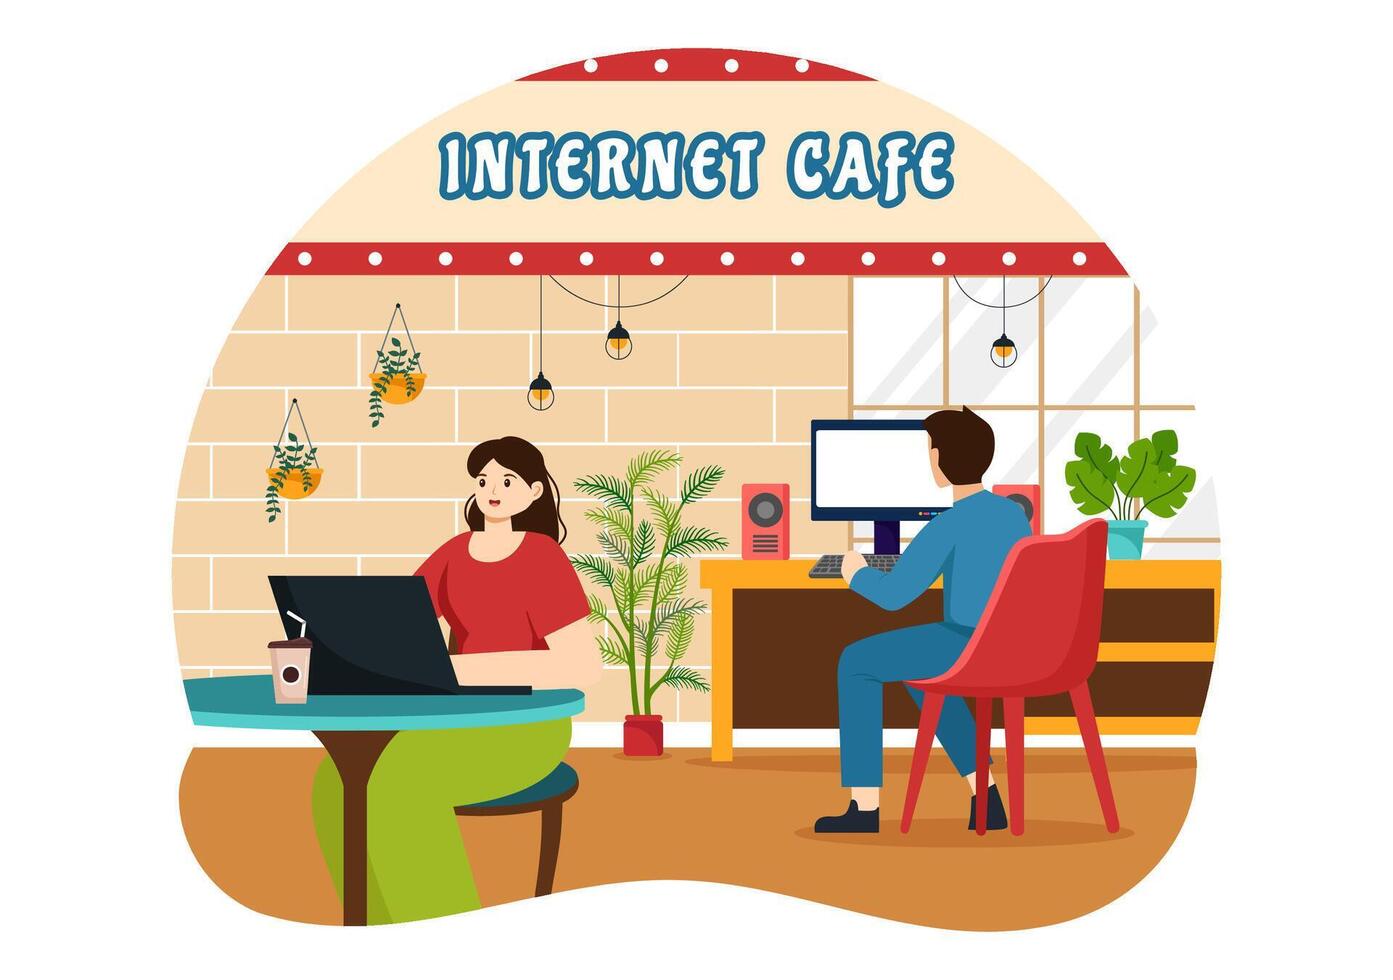 Internet Cafe Vector Illustration with Building for Young People Playing Games, Workplace use a Laptop, Talking and Drinking in Flat Background